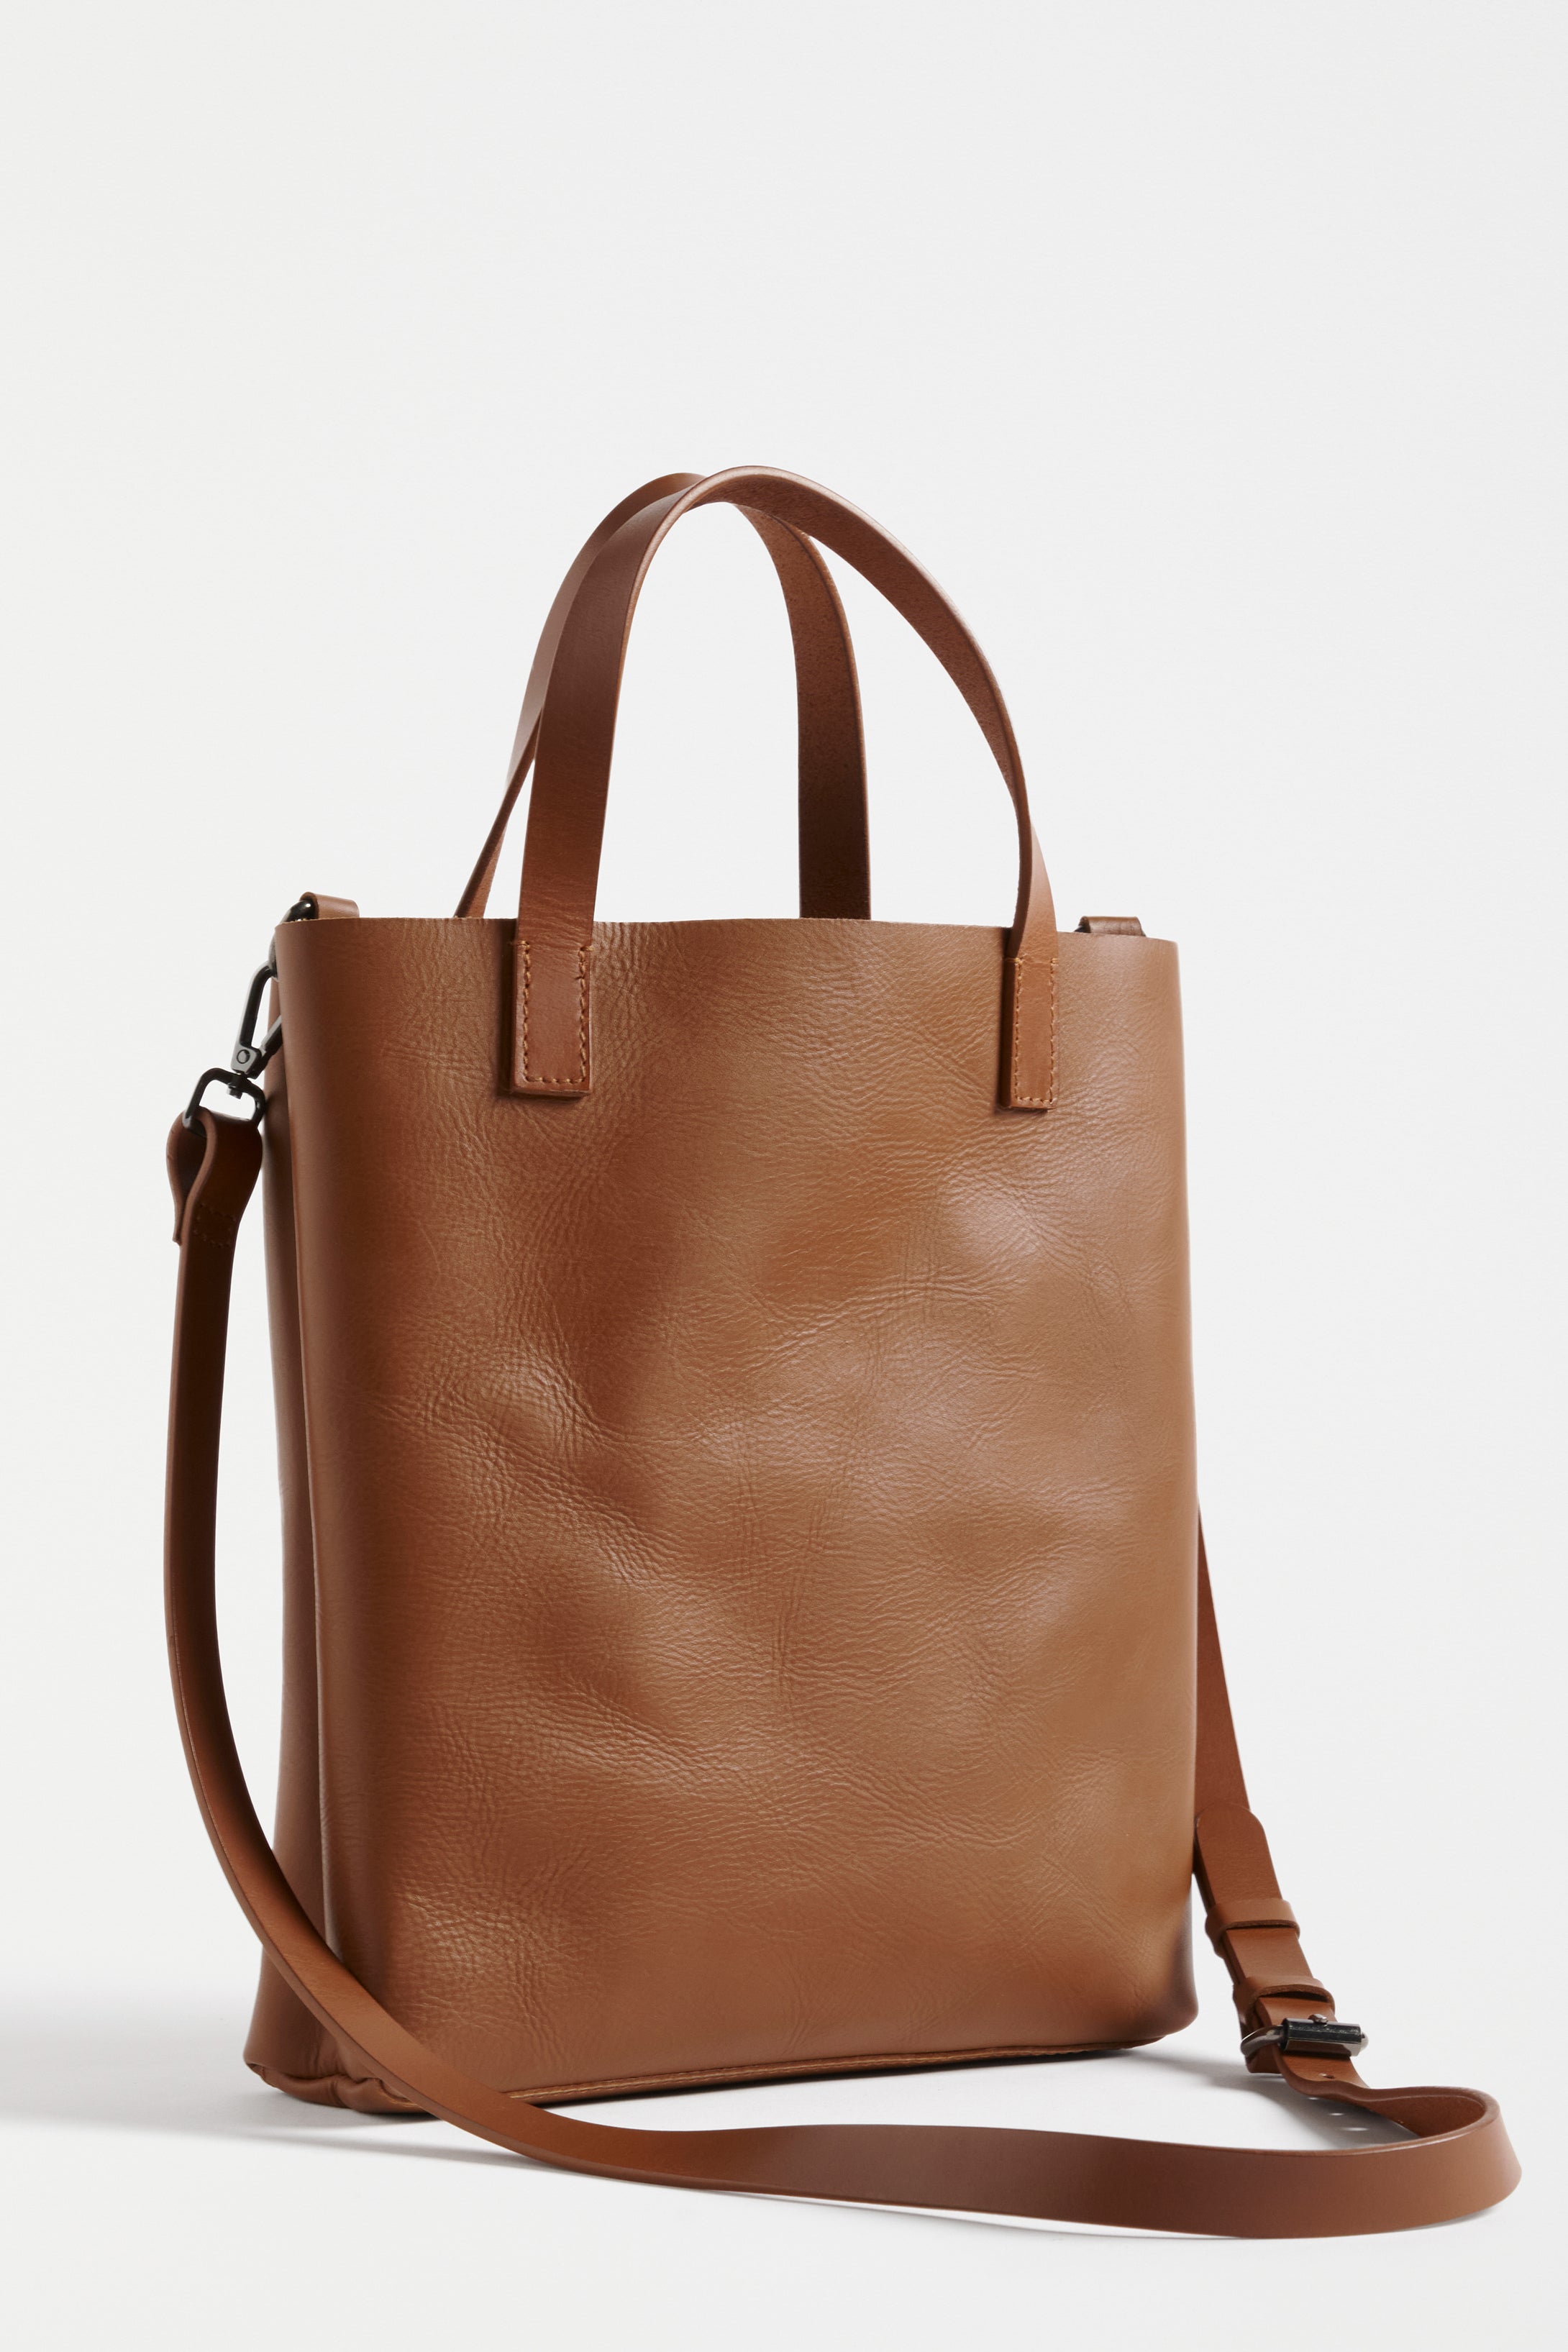 Kopa Medium Size Leather Tote Bag with Detachable Strap Front | TAN